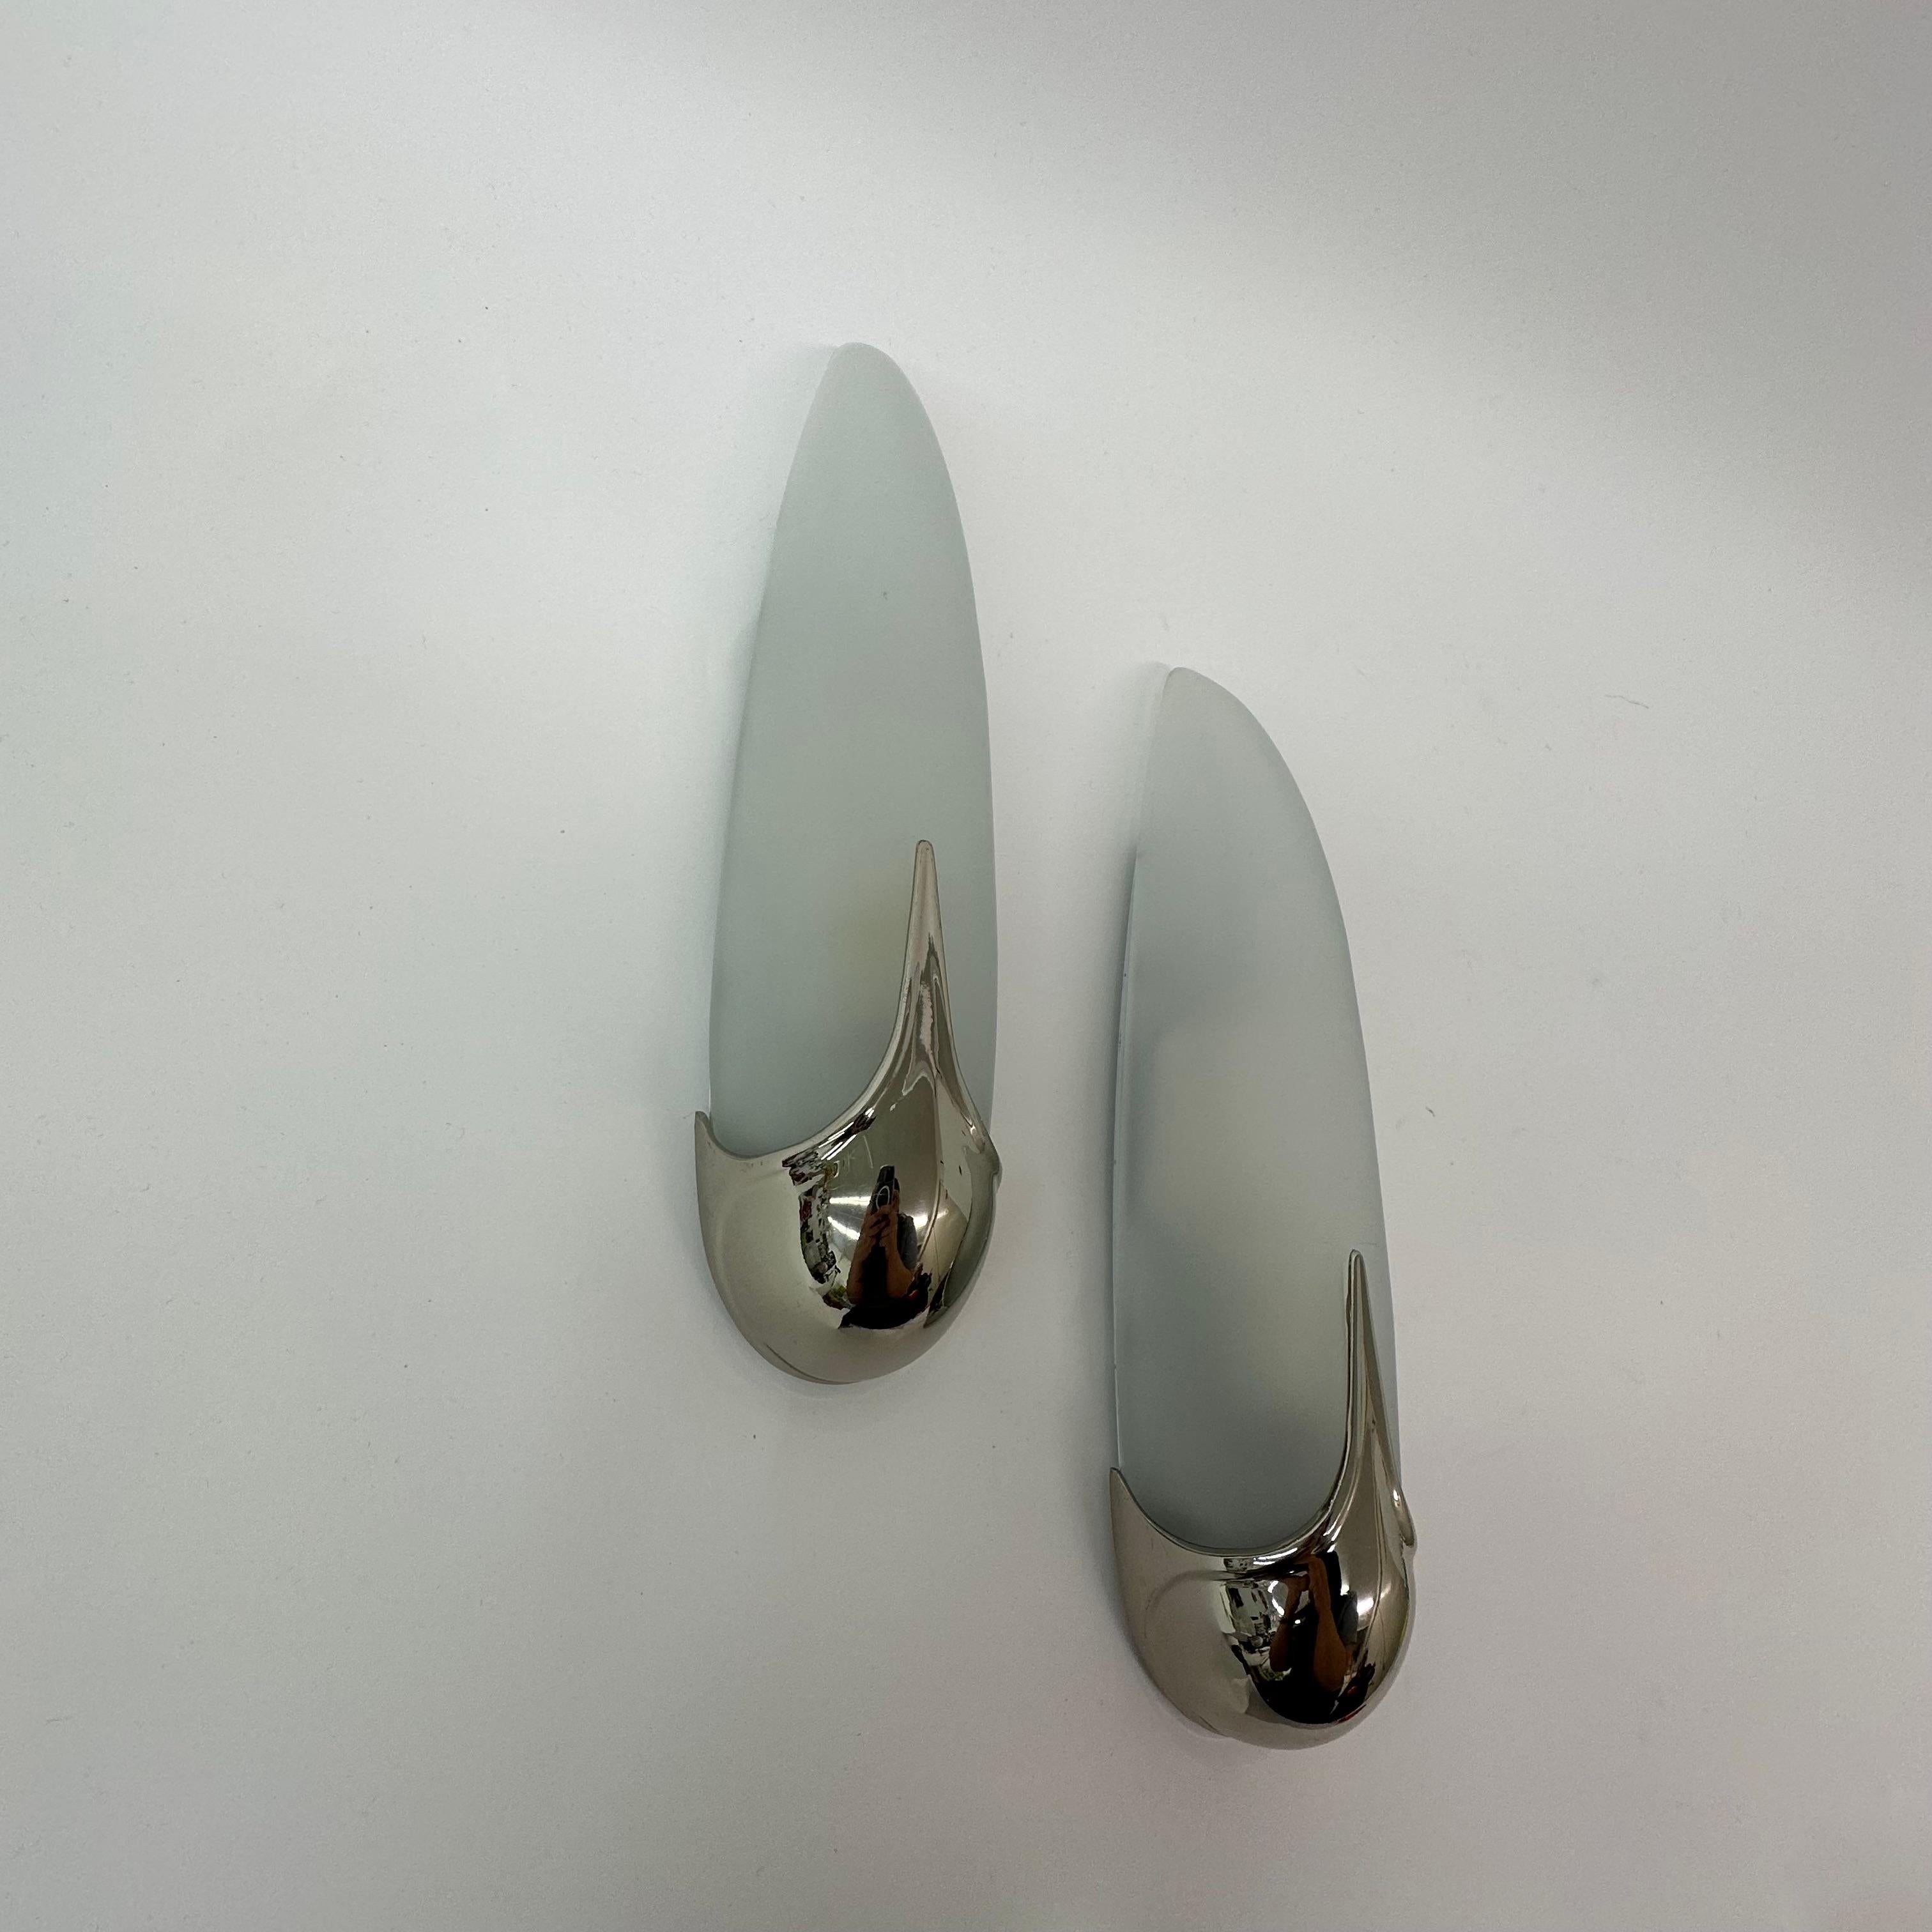 Pair of Idearte Sconces Wall Lamps, Spain, 1980s For Sale 3